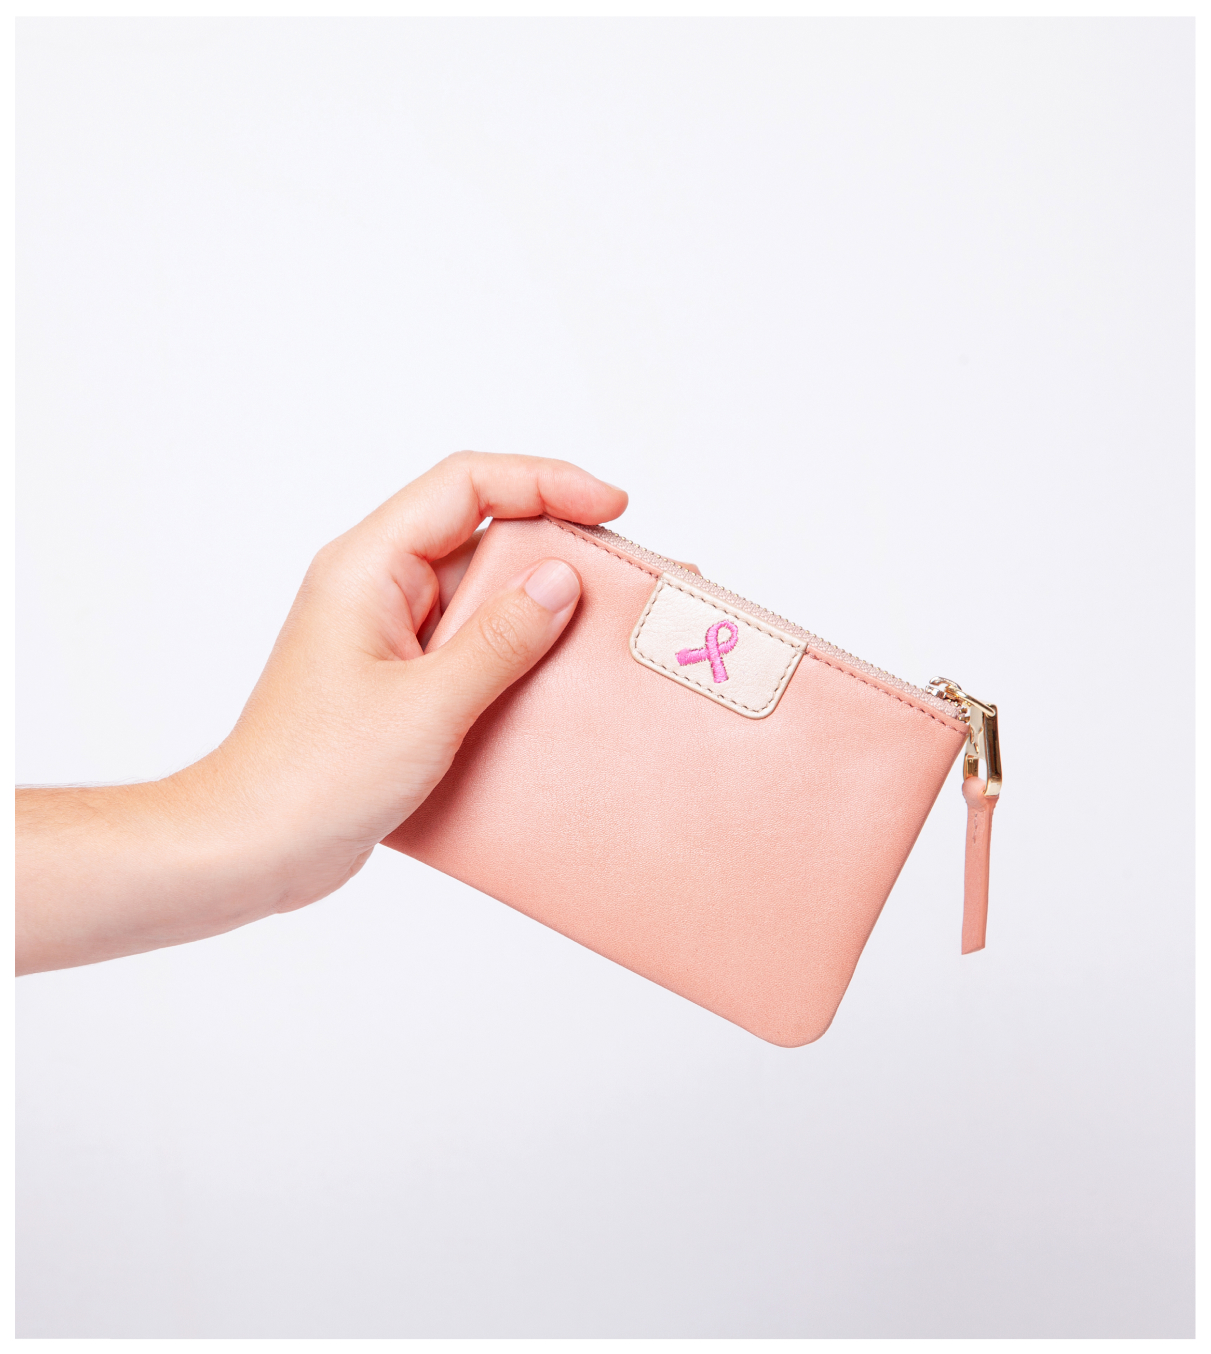 Picture of the pink
purse with breats cancer logo